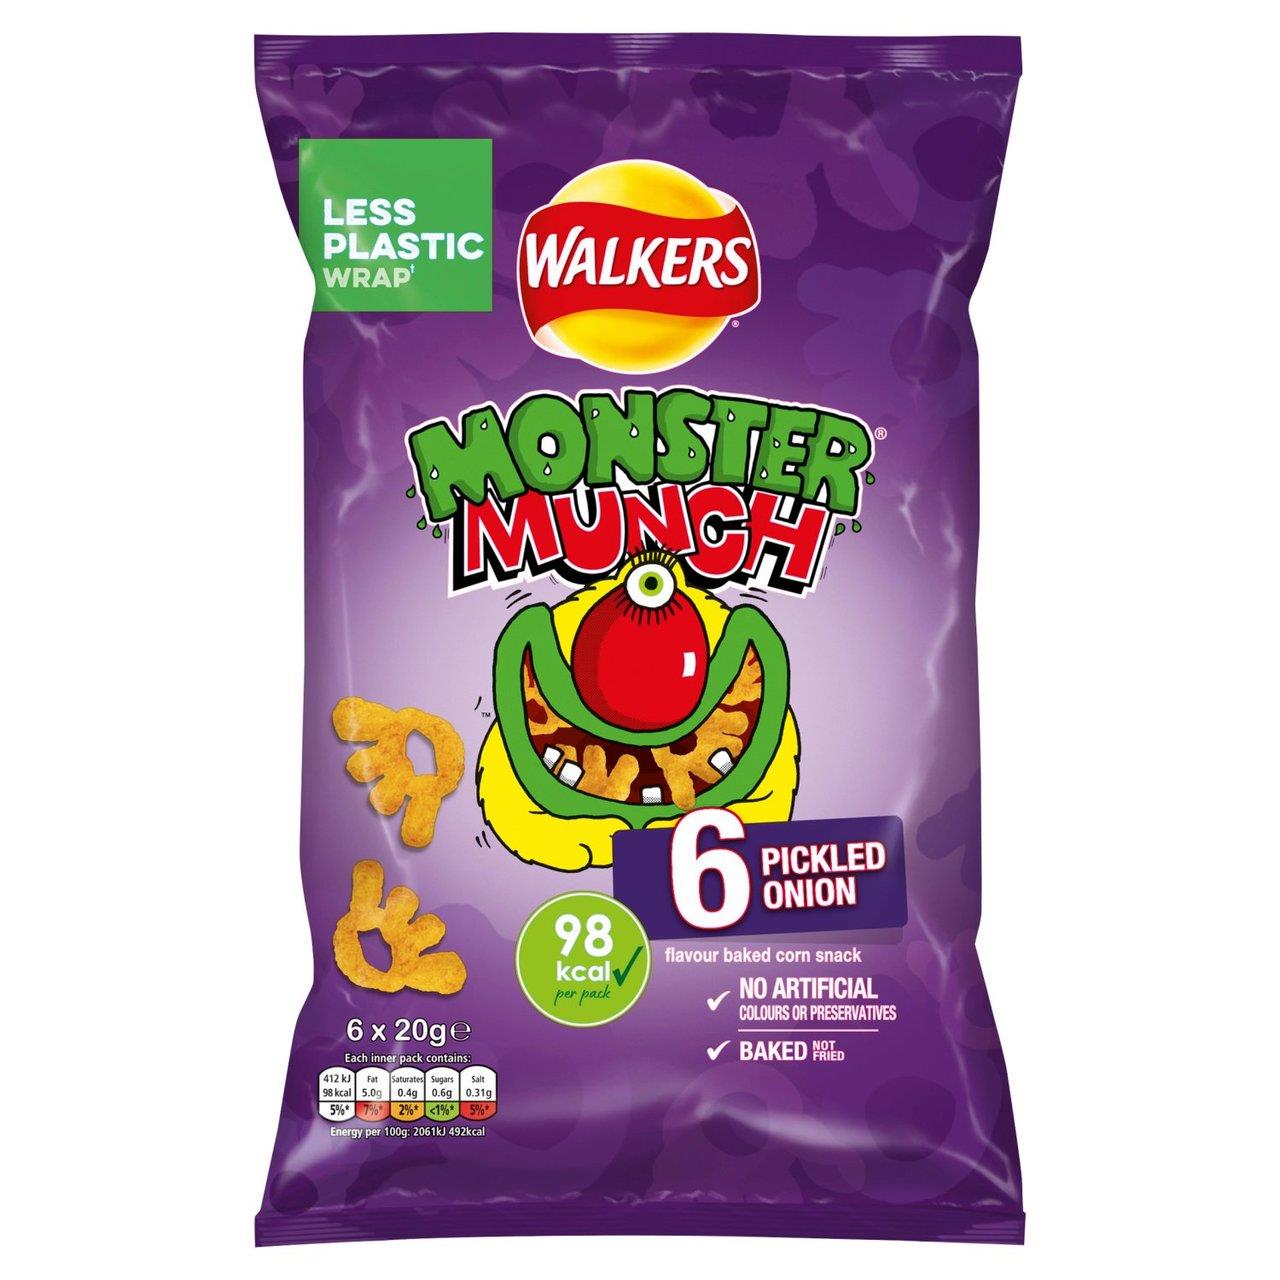 Walkers Monster Munch Pickled Onion 6 Pack 22g